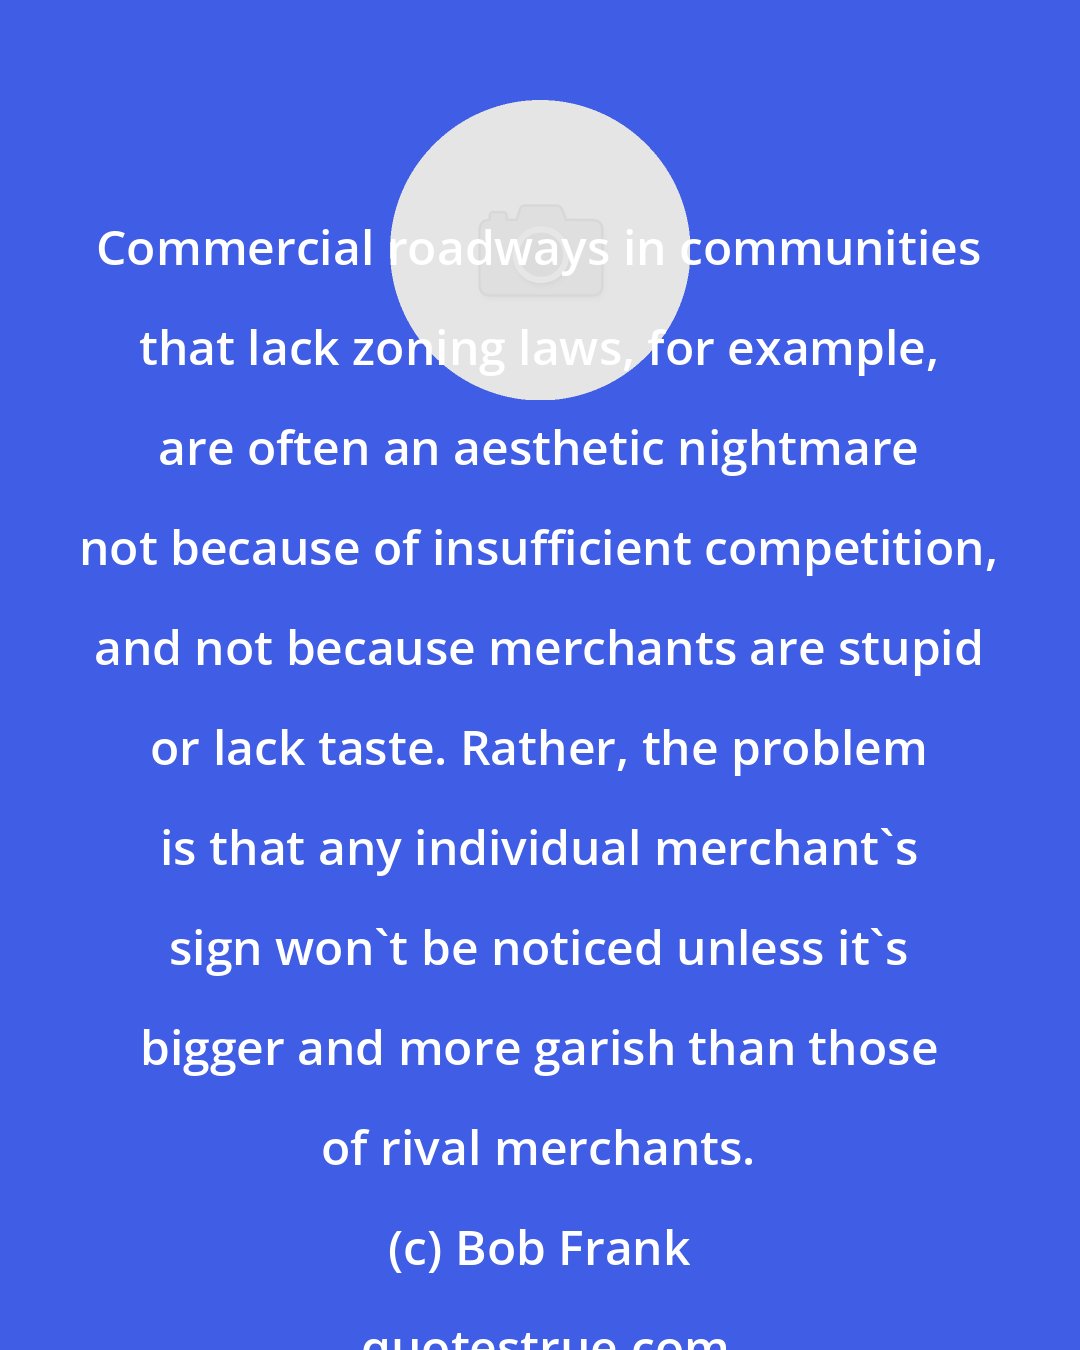 Bob Frank: Commercial roadways in communities that lack zoning laws, for example, are often an aesthetic nightmare not because of insufficient competition, and not because merchants are stupid or lack taste. Rather, the problem is that any individual merchant's sign won't be noticed unless it's bigger and more garish than those of rival merchants.